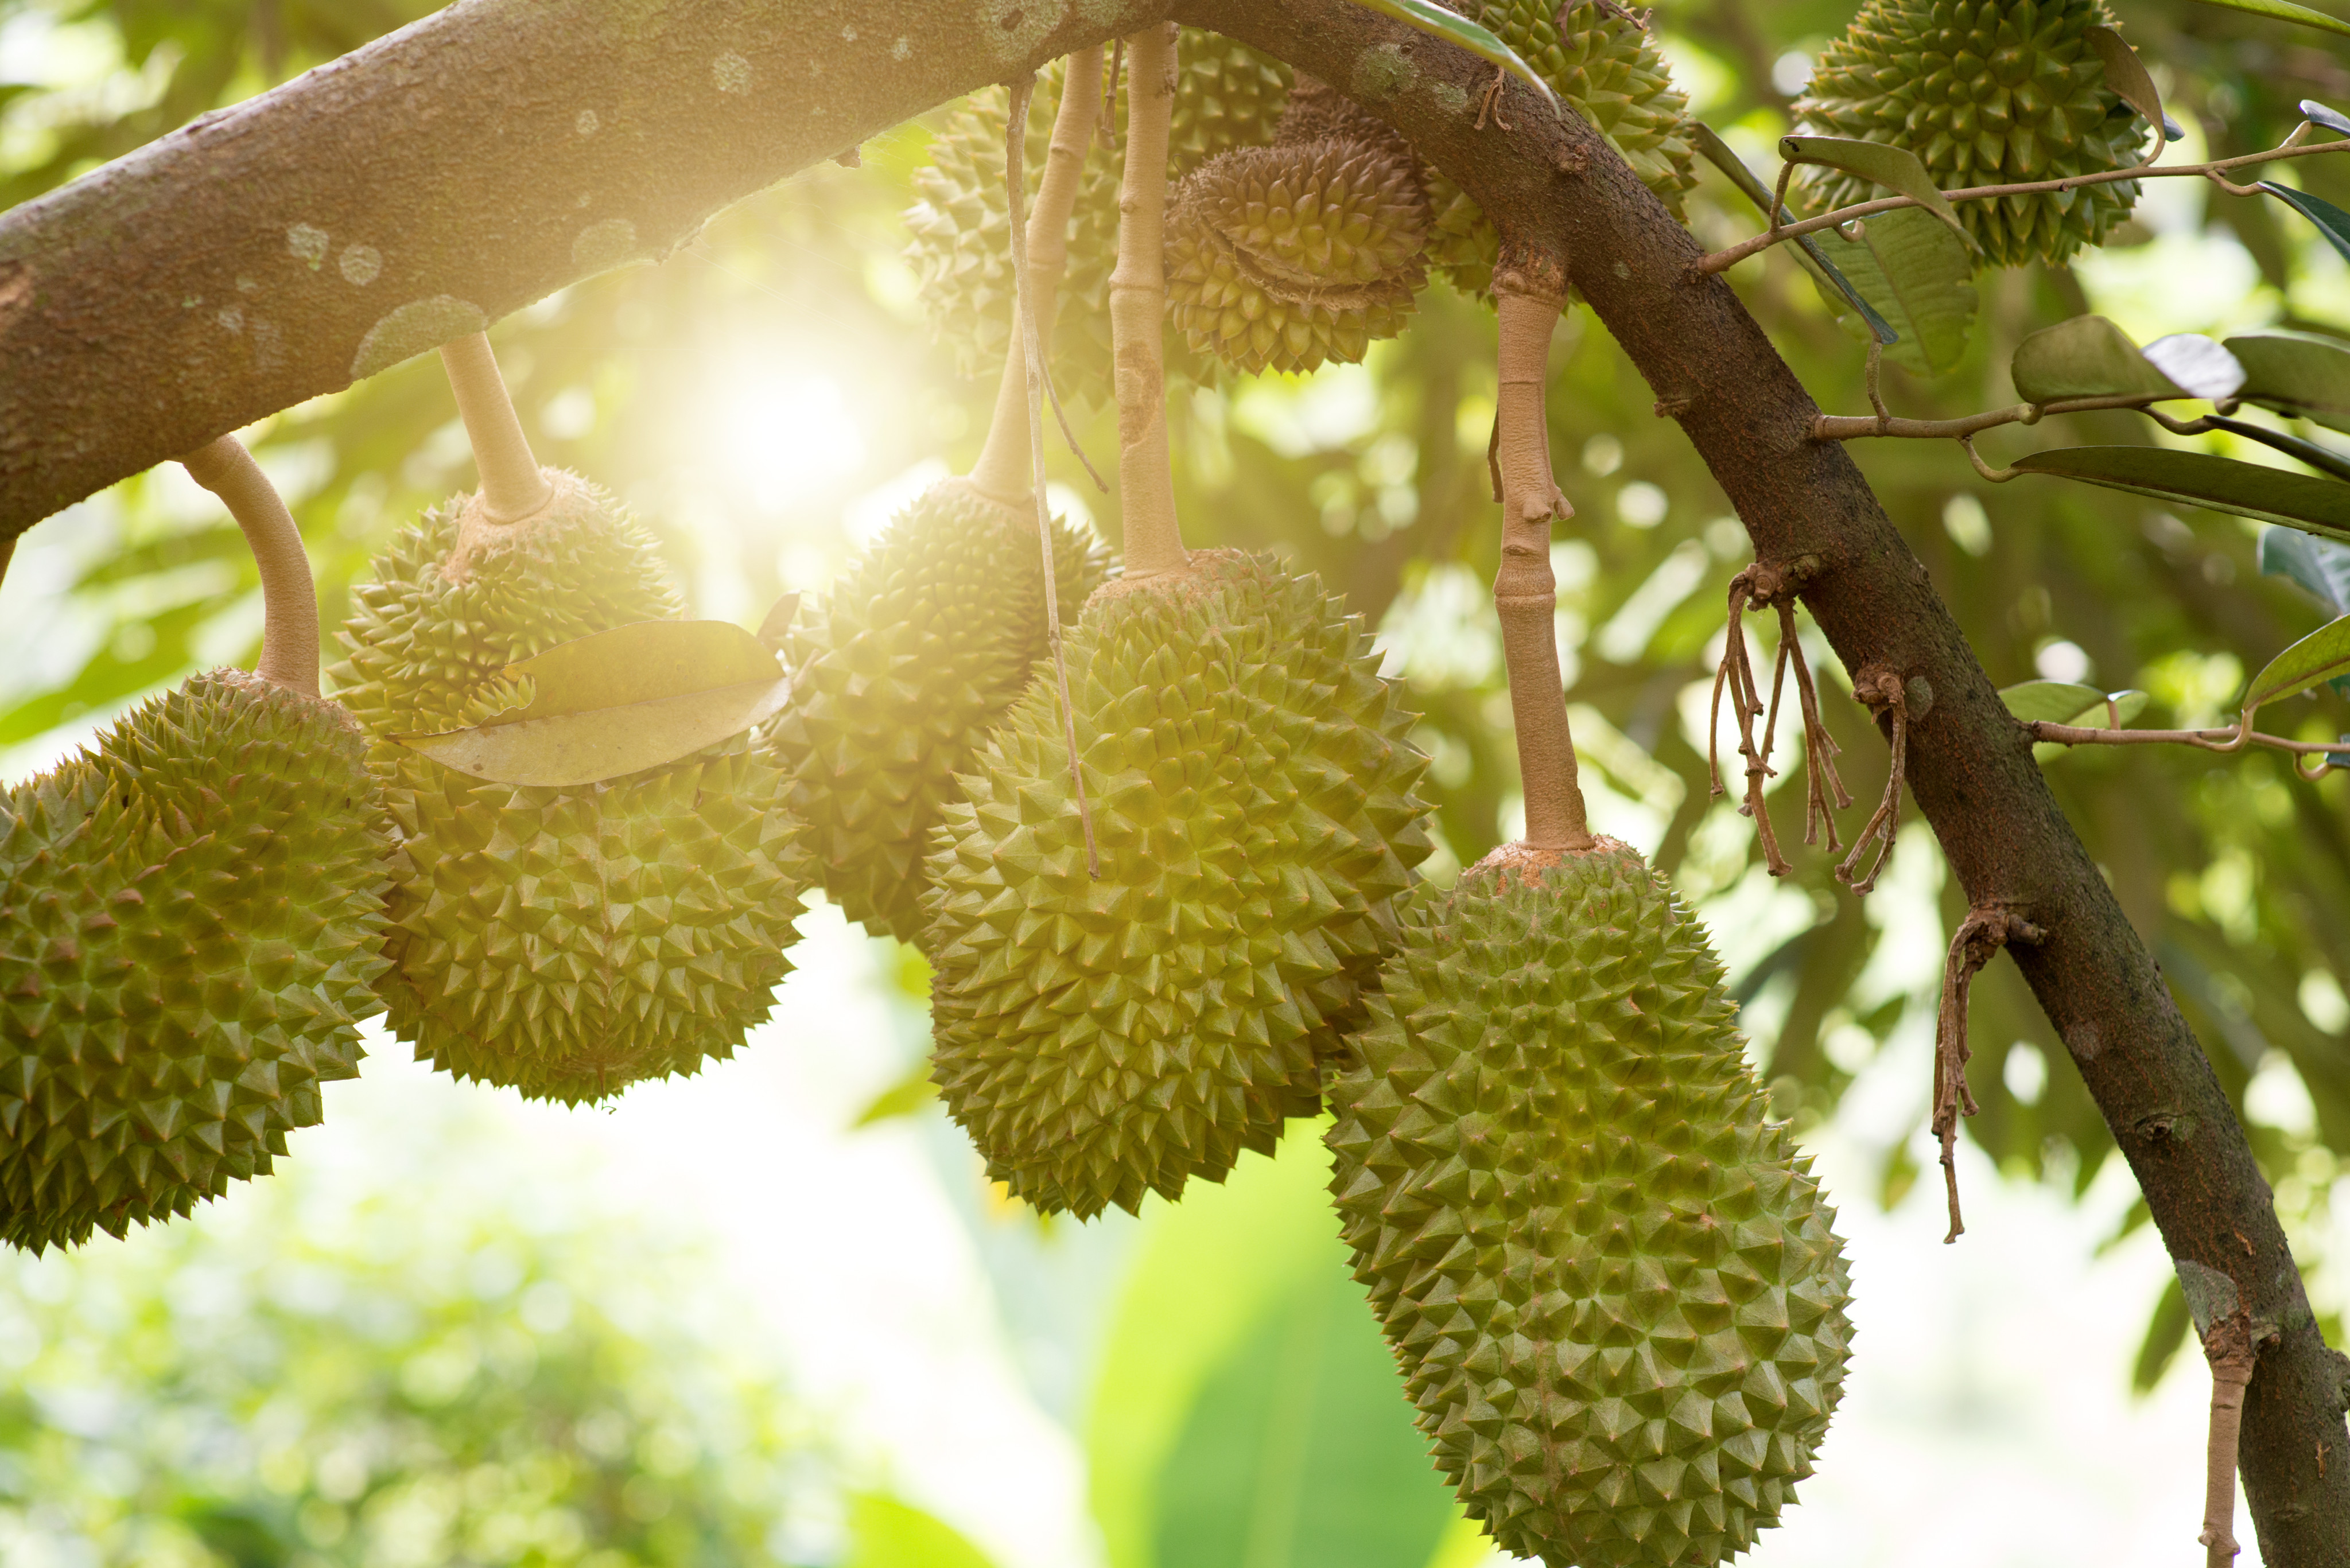 Chinese are keen consumers of durian from Southeast Asian countries such as Thailand, Malaysia and Vietnam. Photo: Shutterstock Images